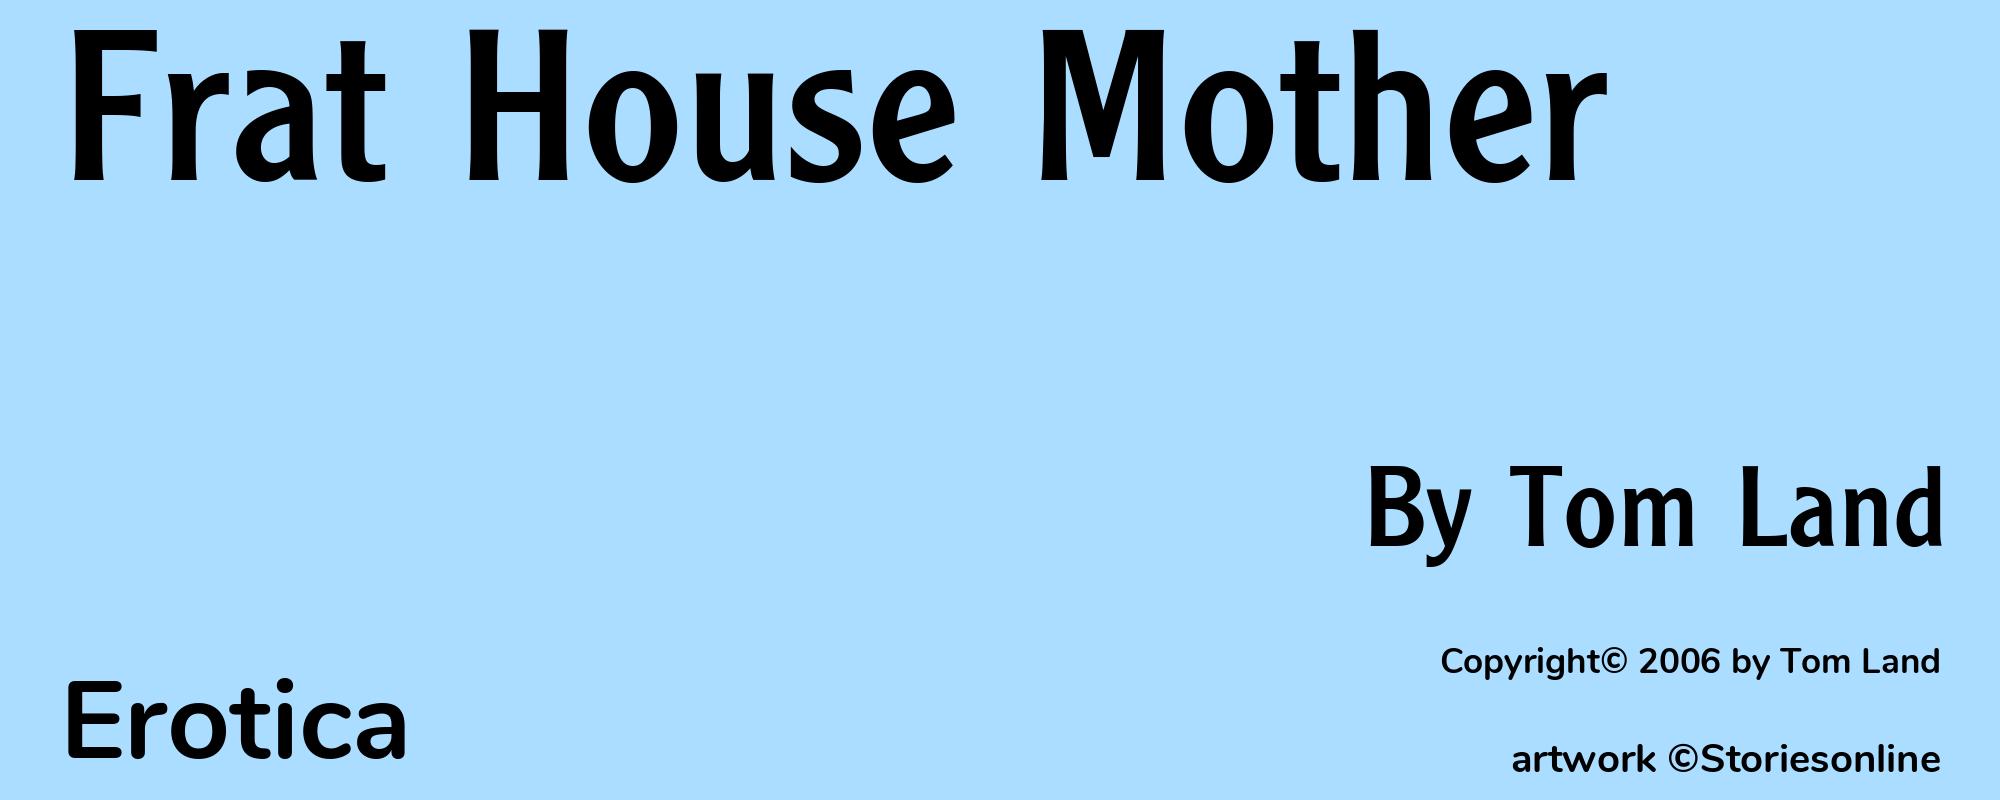 Frat House Mother - Cover